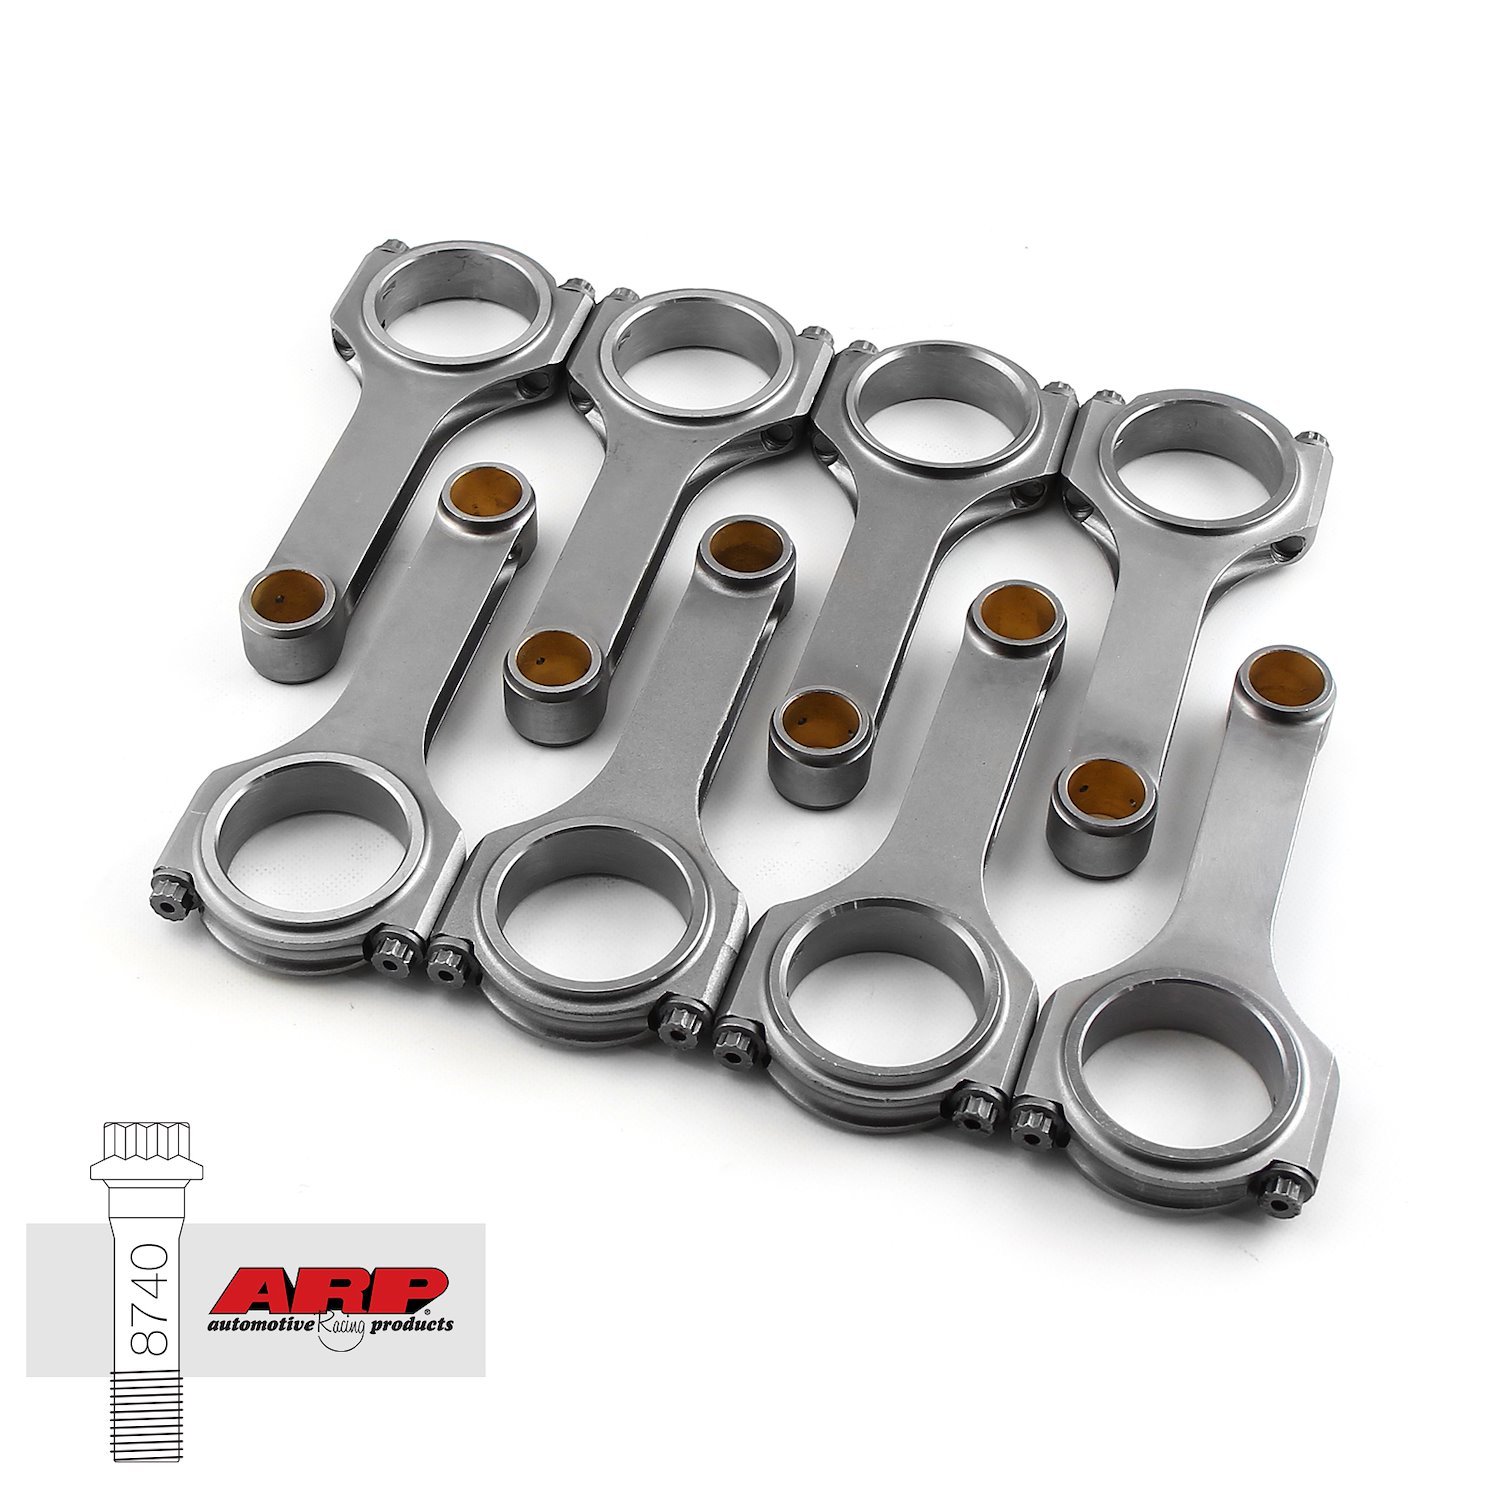 H BEAM 5.700 2.100 .927 4340 CONNECTING RODS